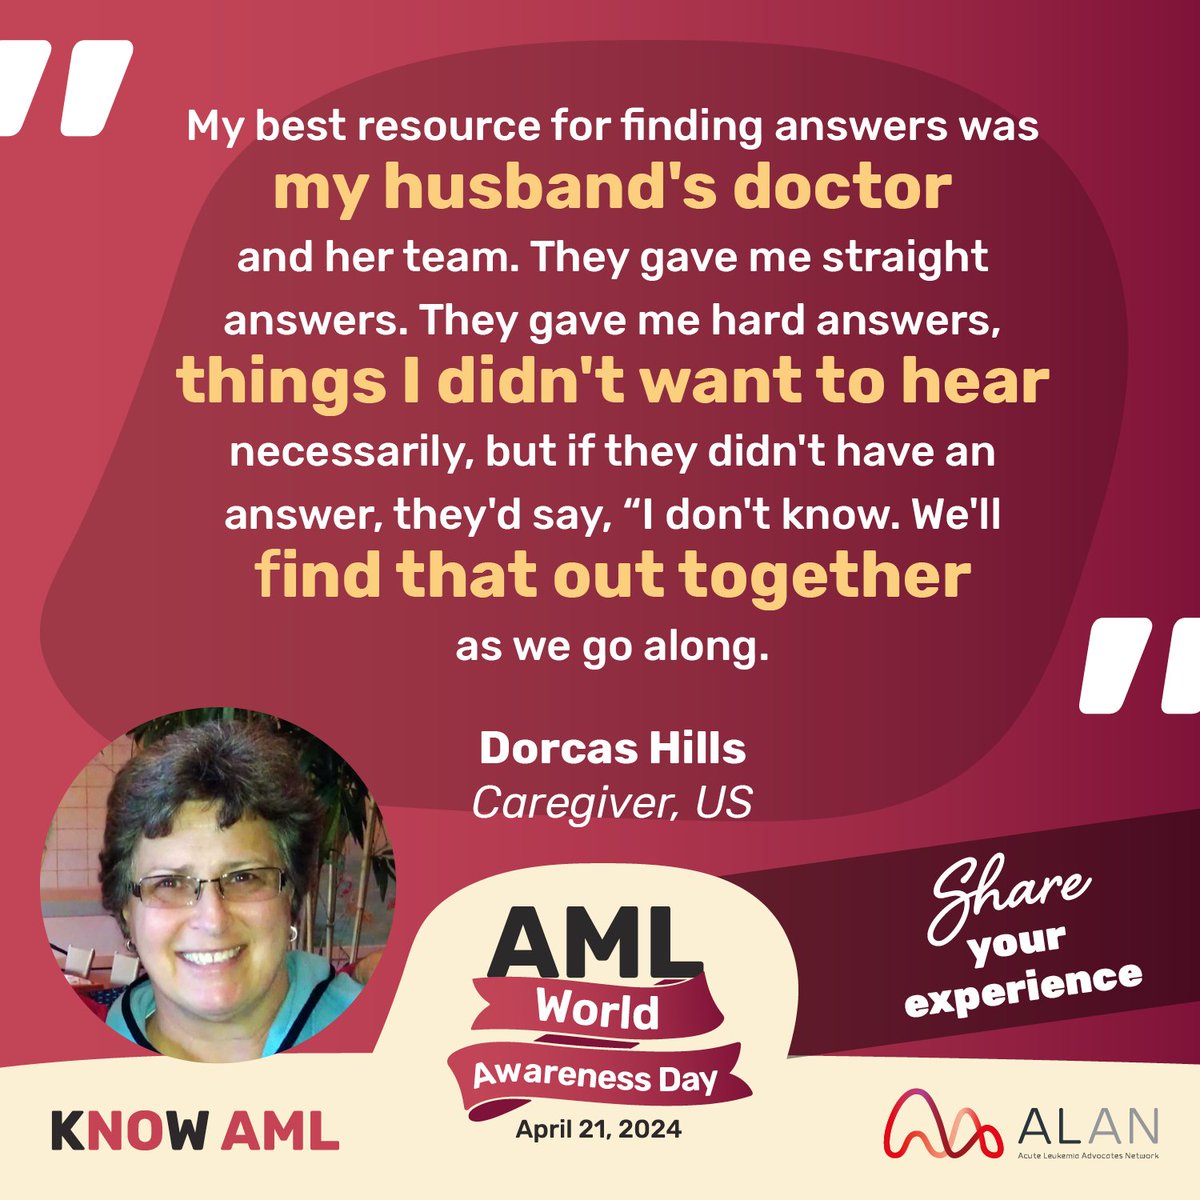 For #AMLWorldAwarenessDay, Dorcas Hills shares her experience: know-aml.com/resources/f8e6… Help raise awareness of #AcuteMyeloidLeukemia by sharing YOUR experience or by liking and sharing this post! #KnowAML #BloodCancer